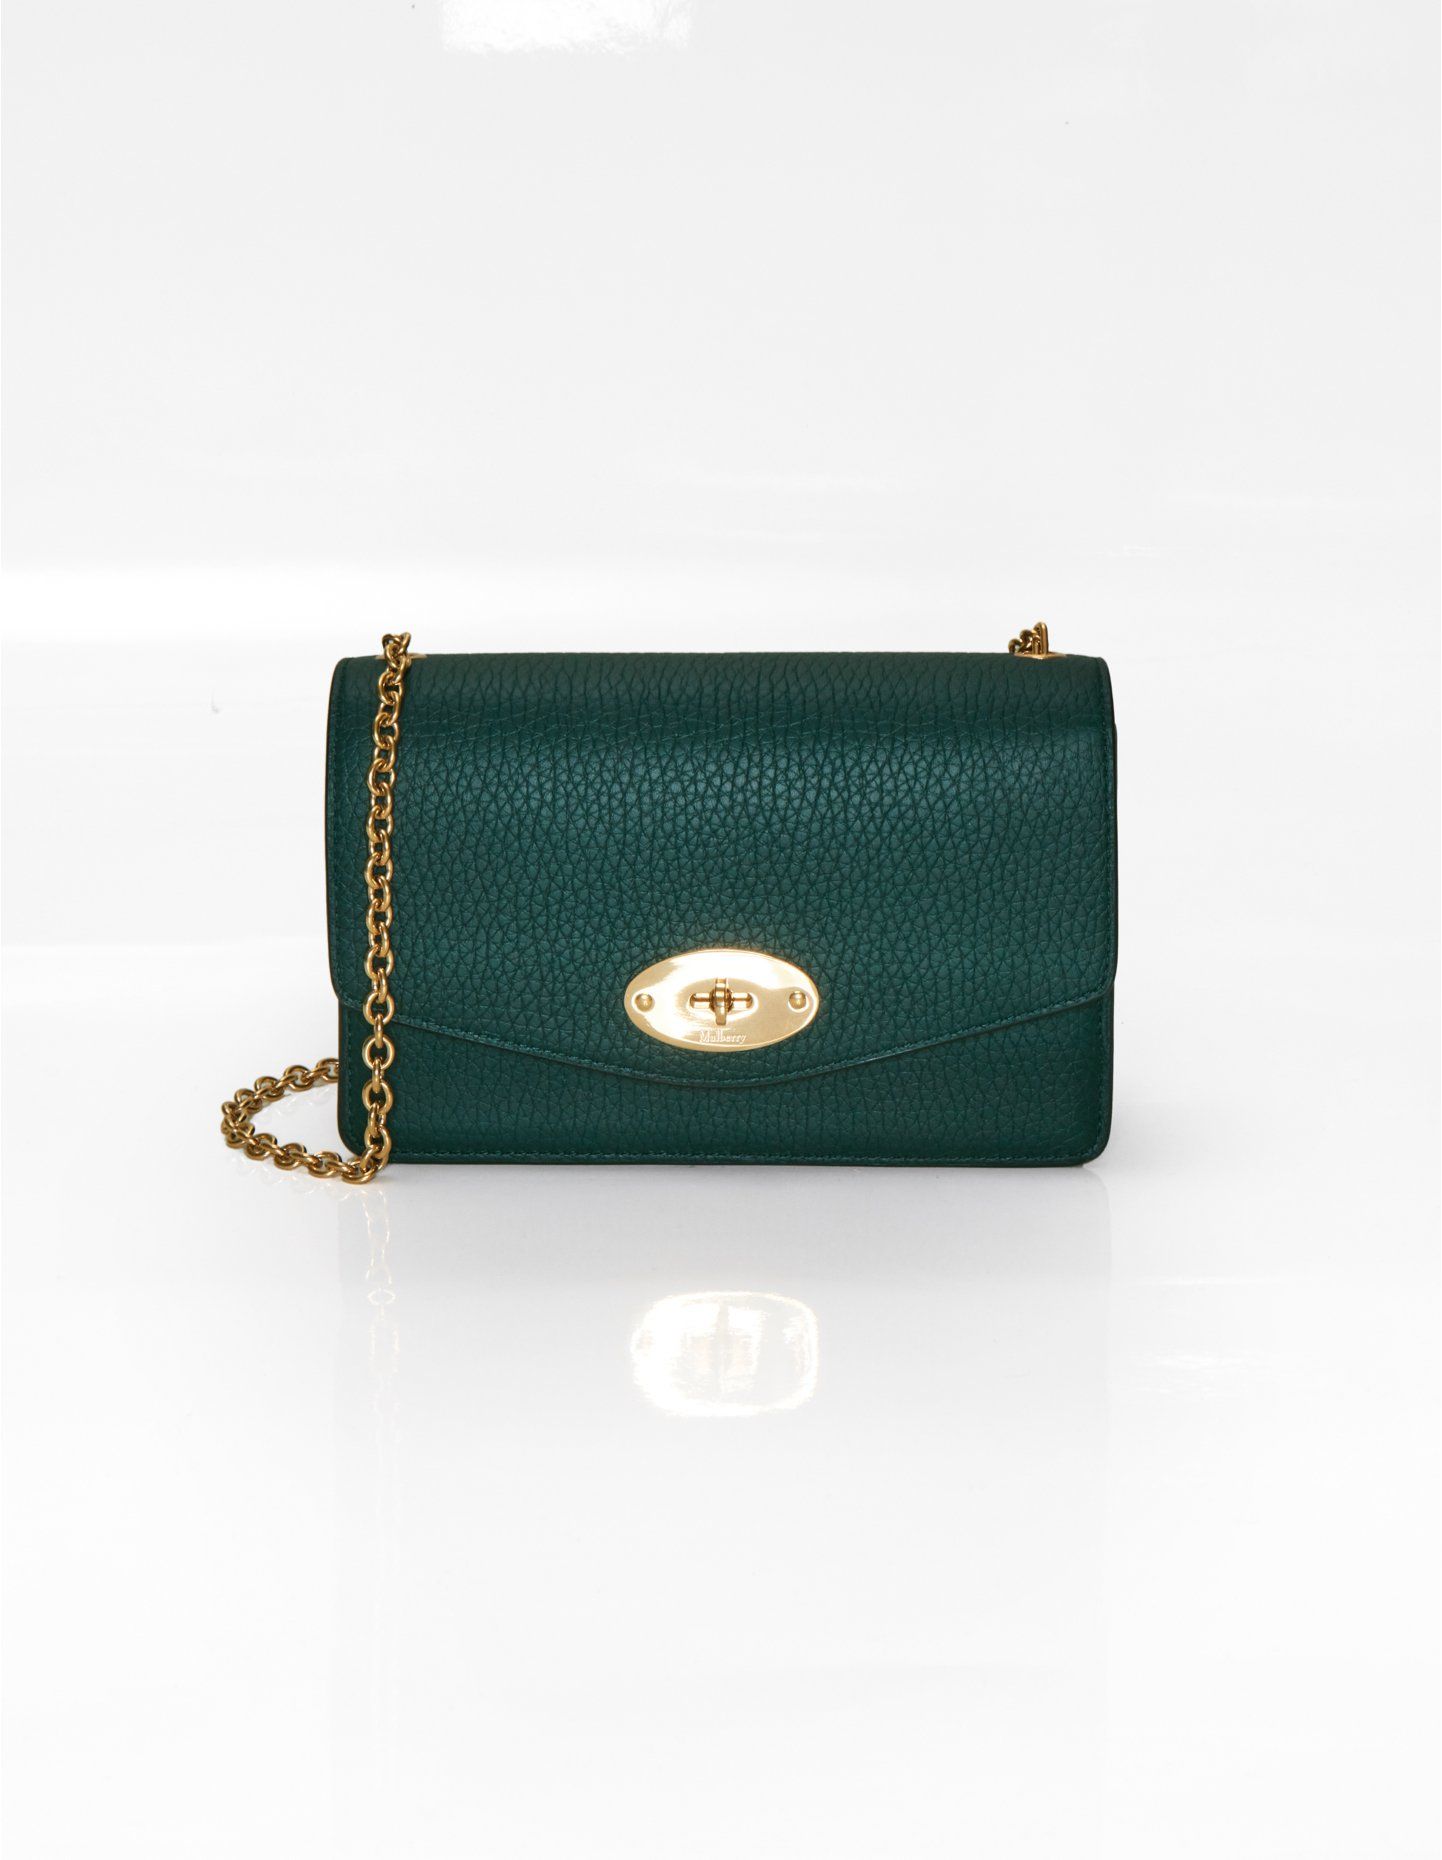 Mulberry Small Darley handbag in Mulberry Green